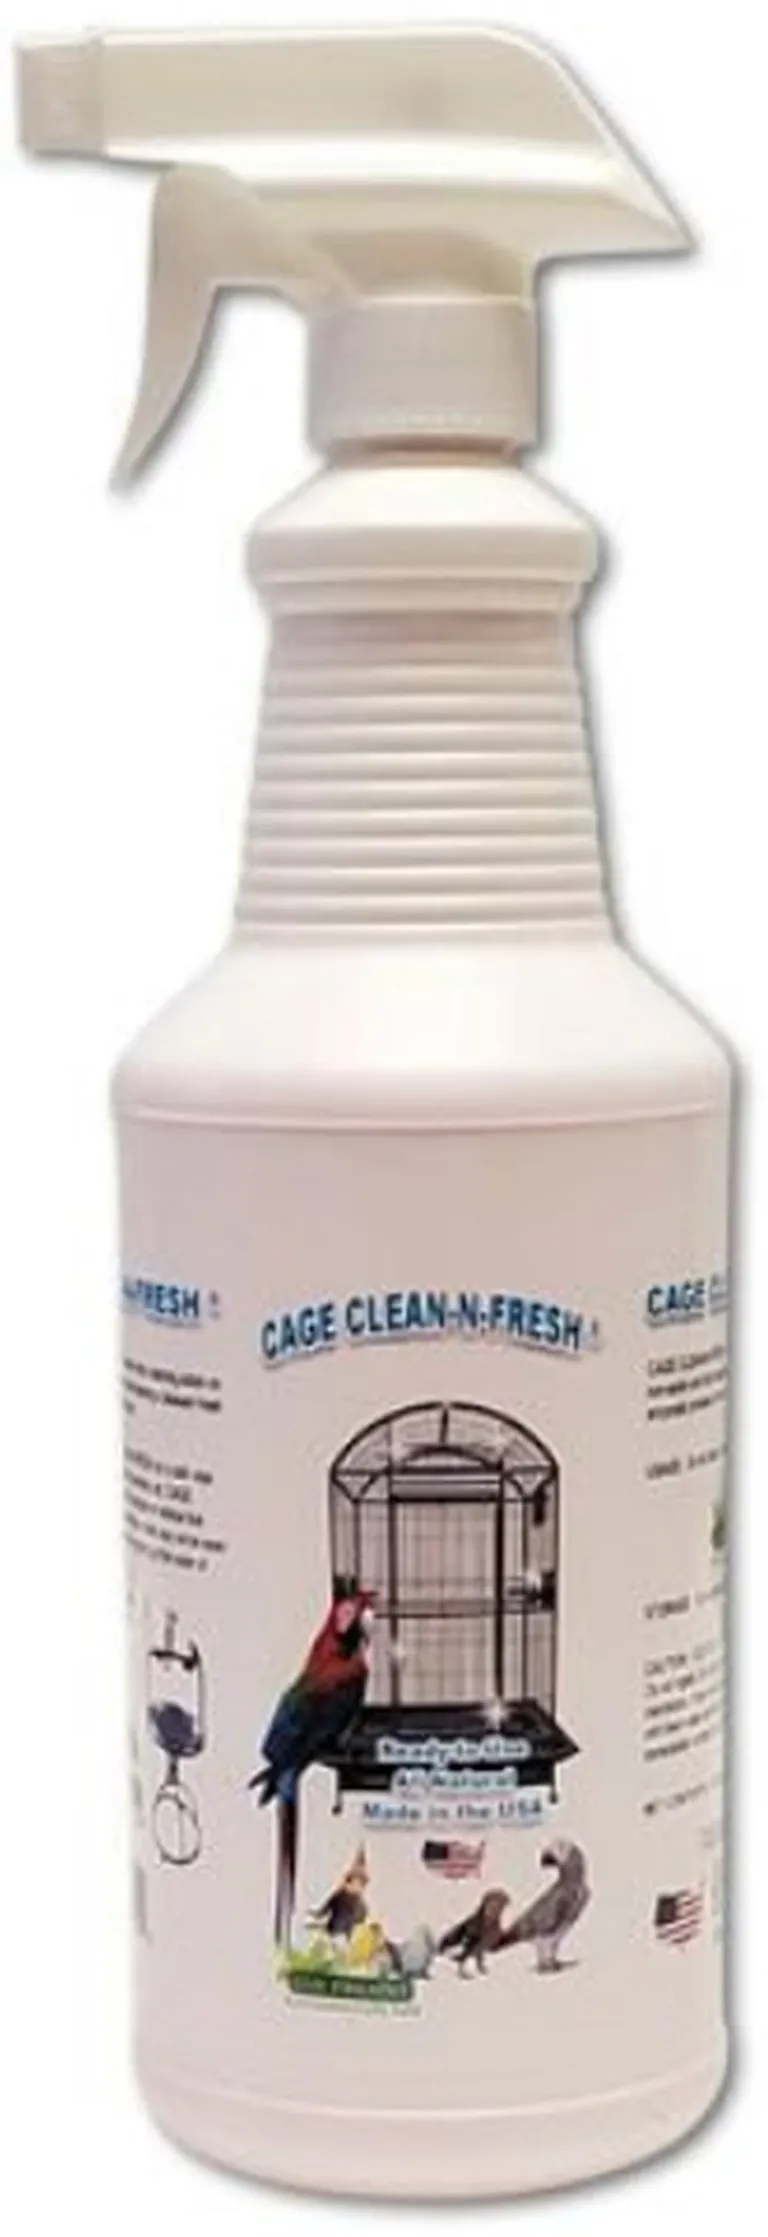 AE Cage Company Cage Clean n Fresh Cage Cleaner Fresh Peppermint Scent Photo 2